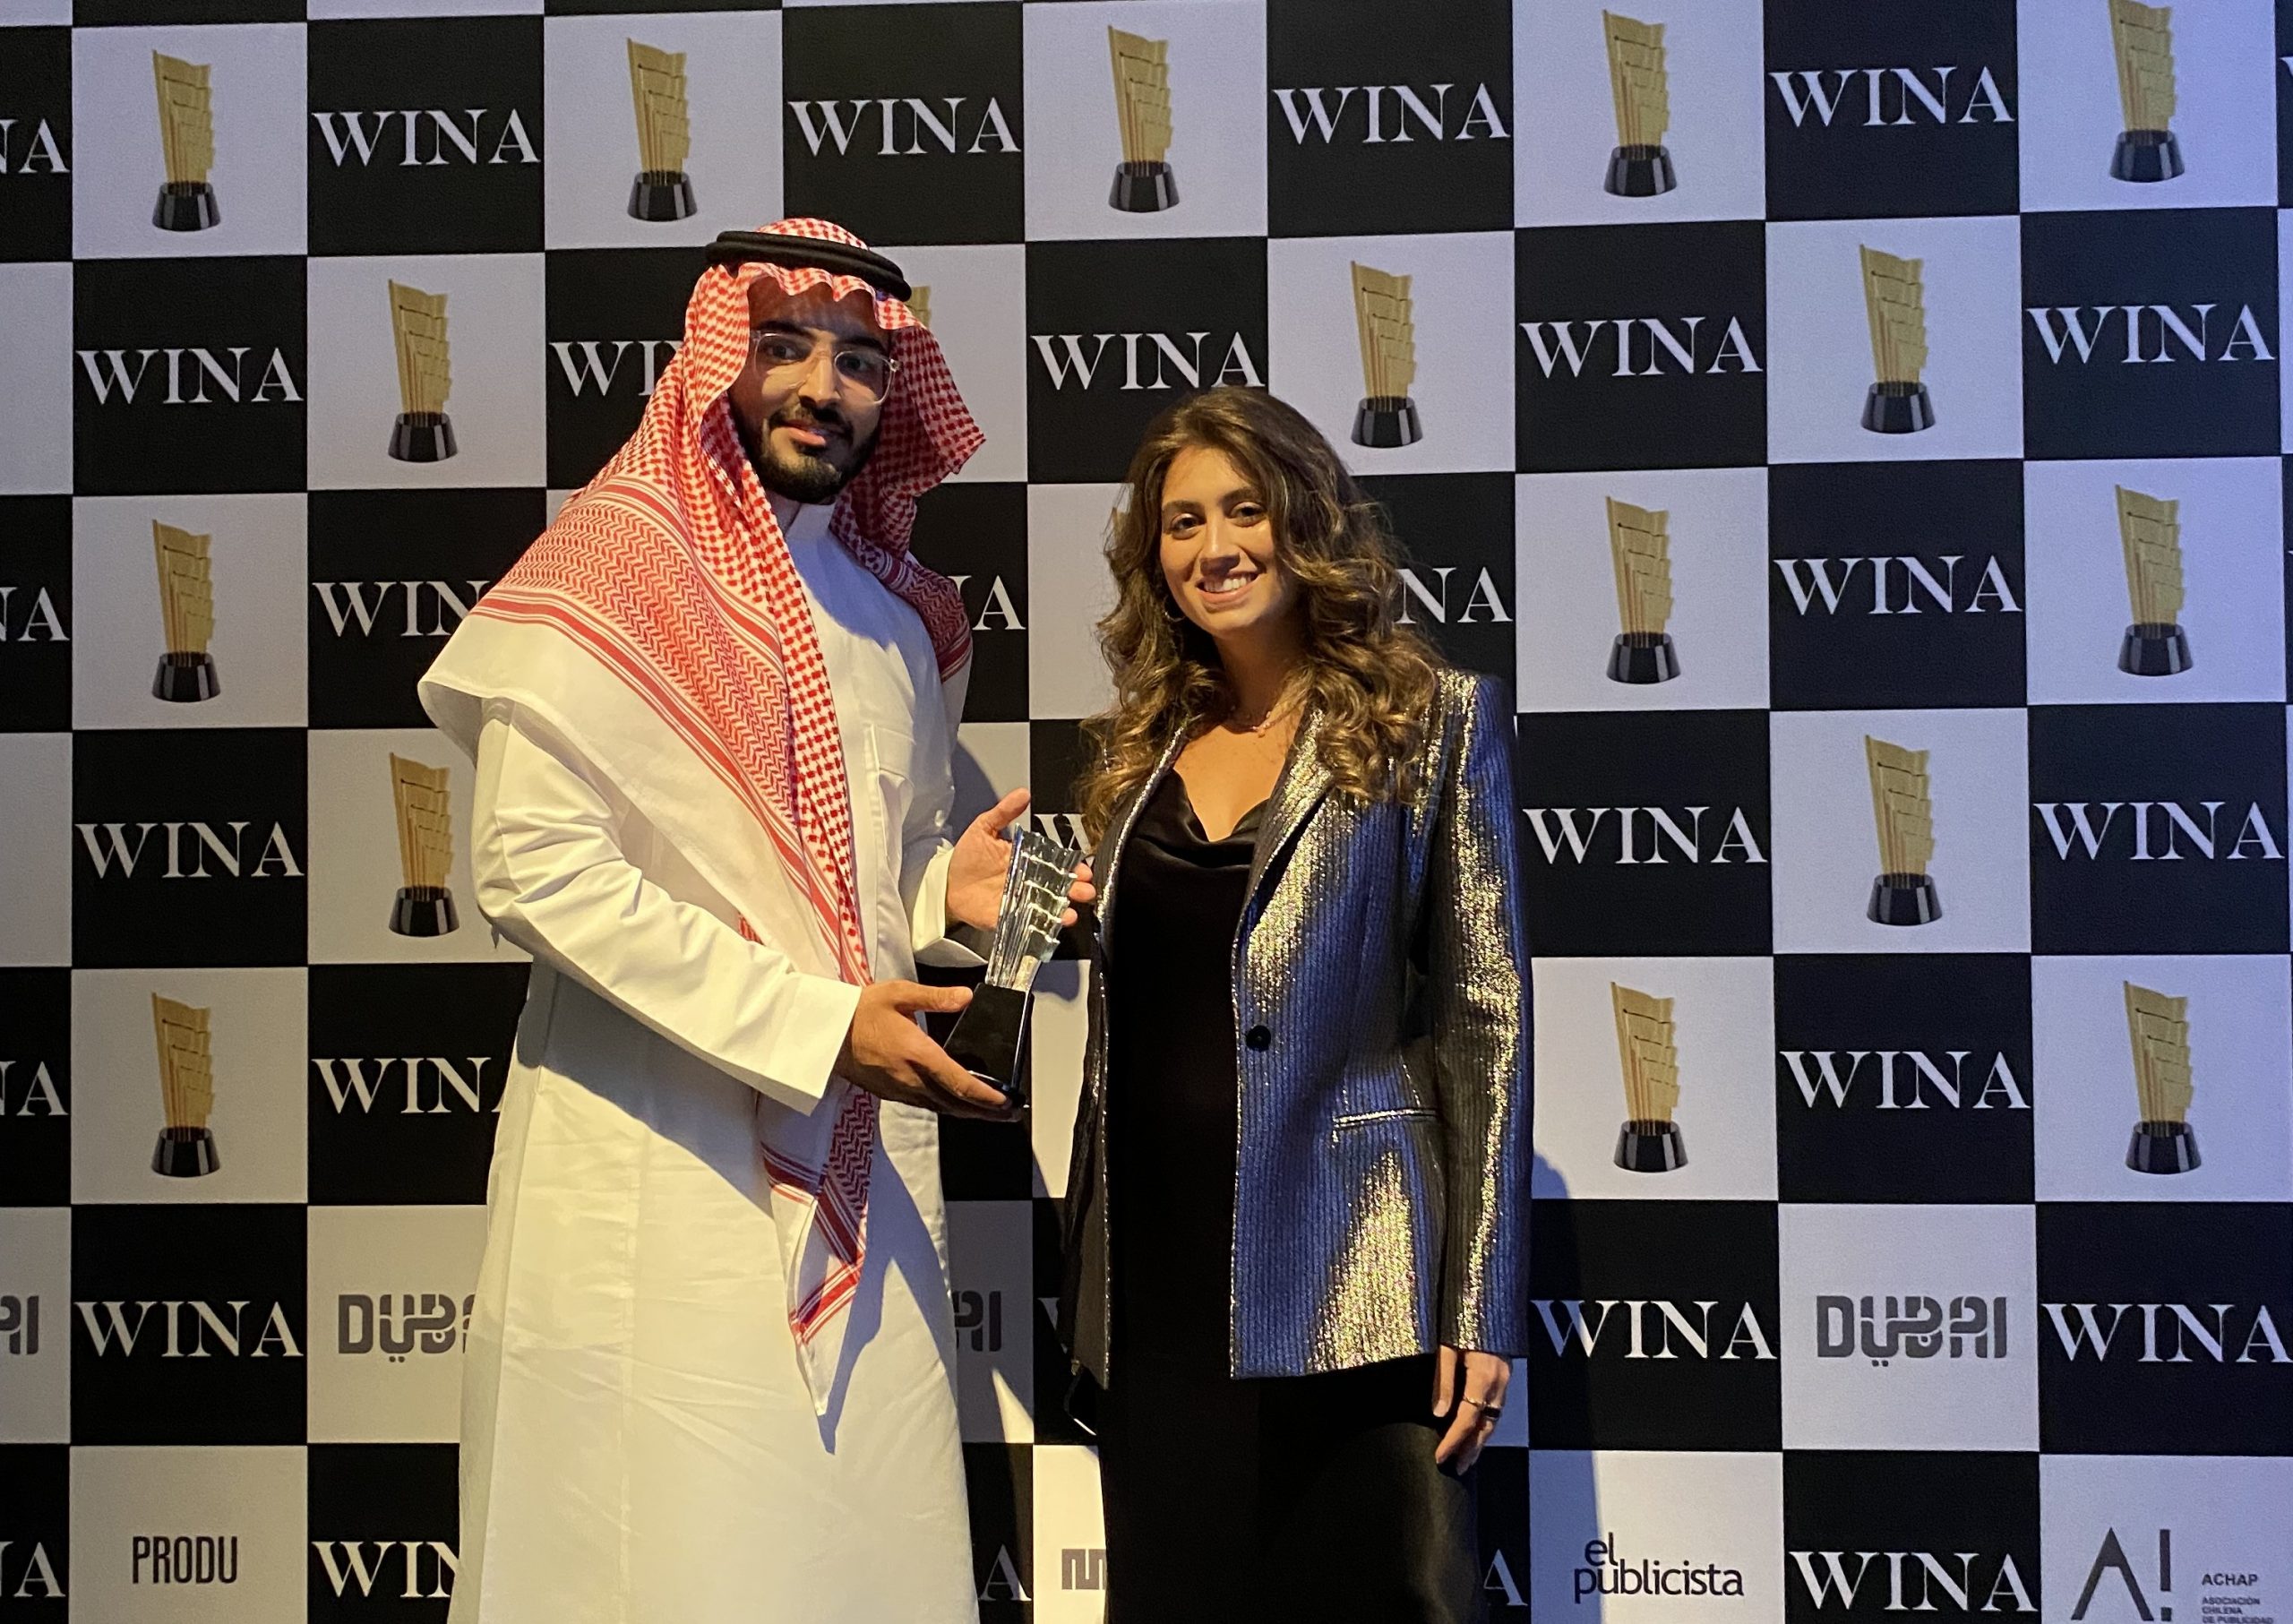 In Dubai, WINA presented awards to the best independent agencies at the 2022 edition